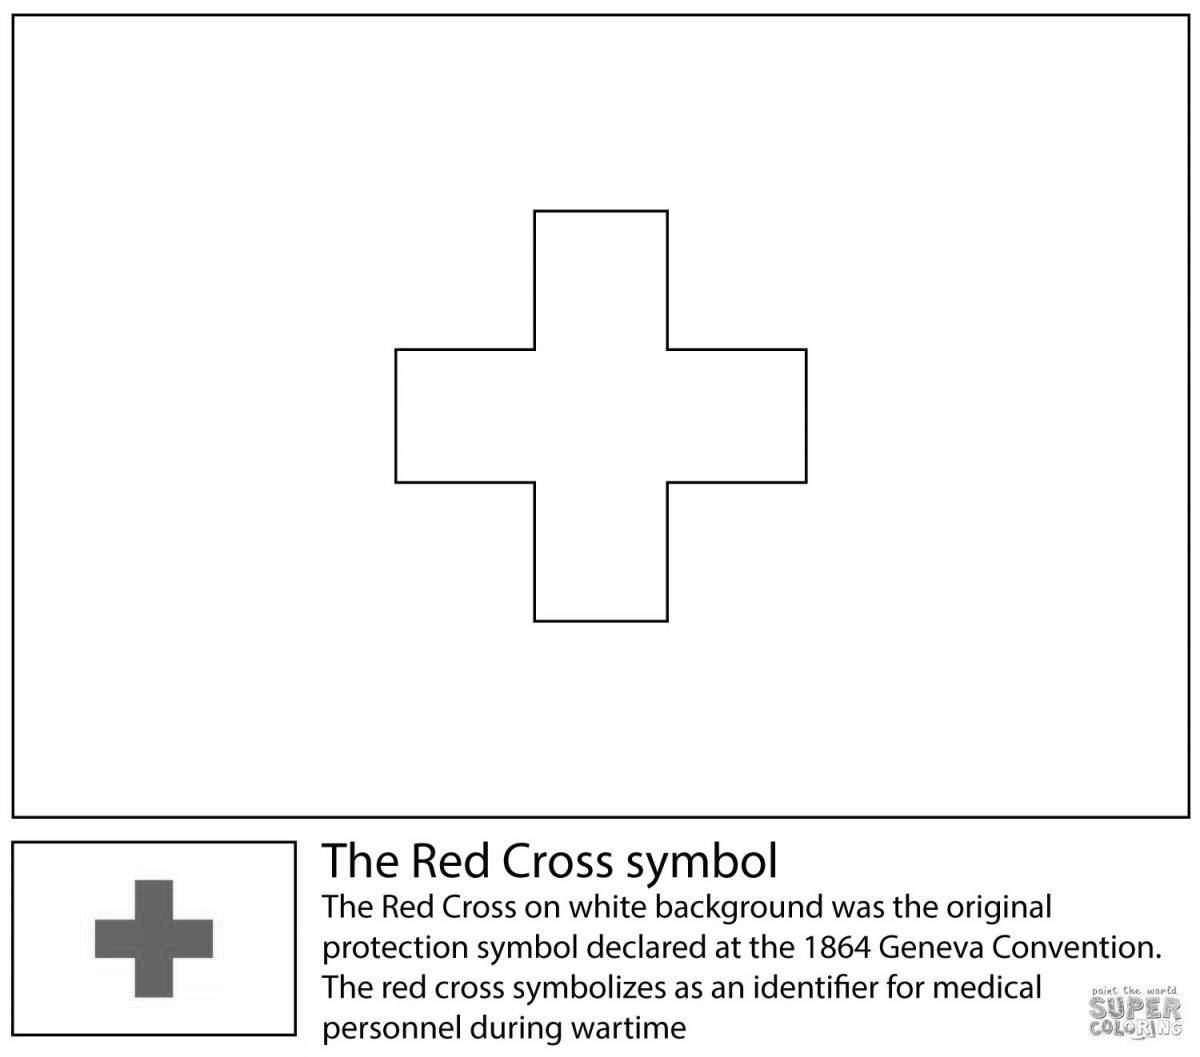 Coloring page charming medical cross